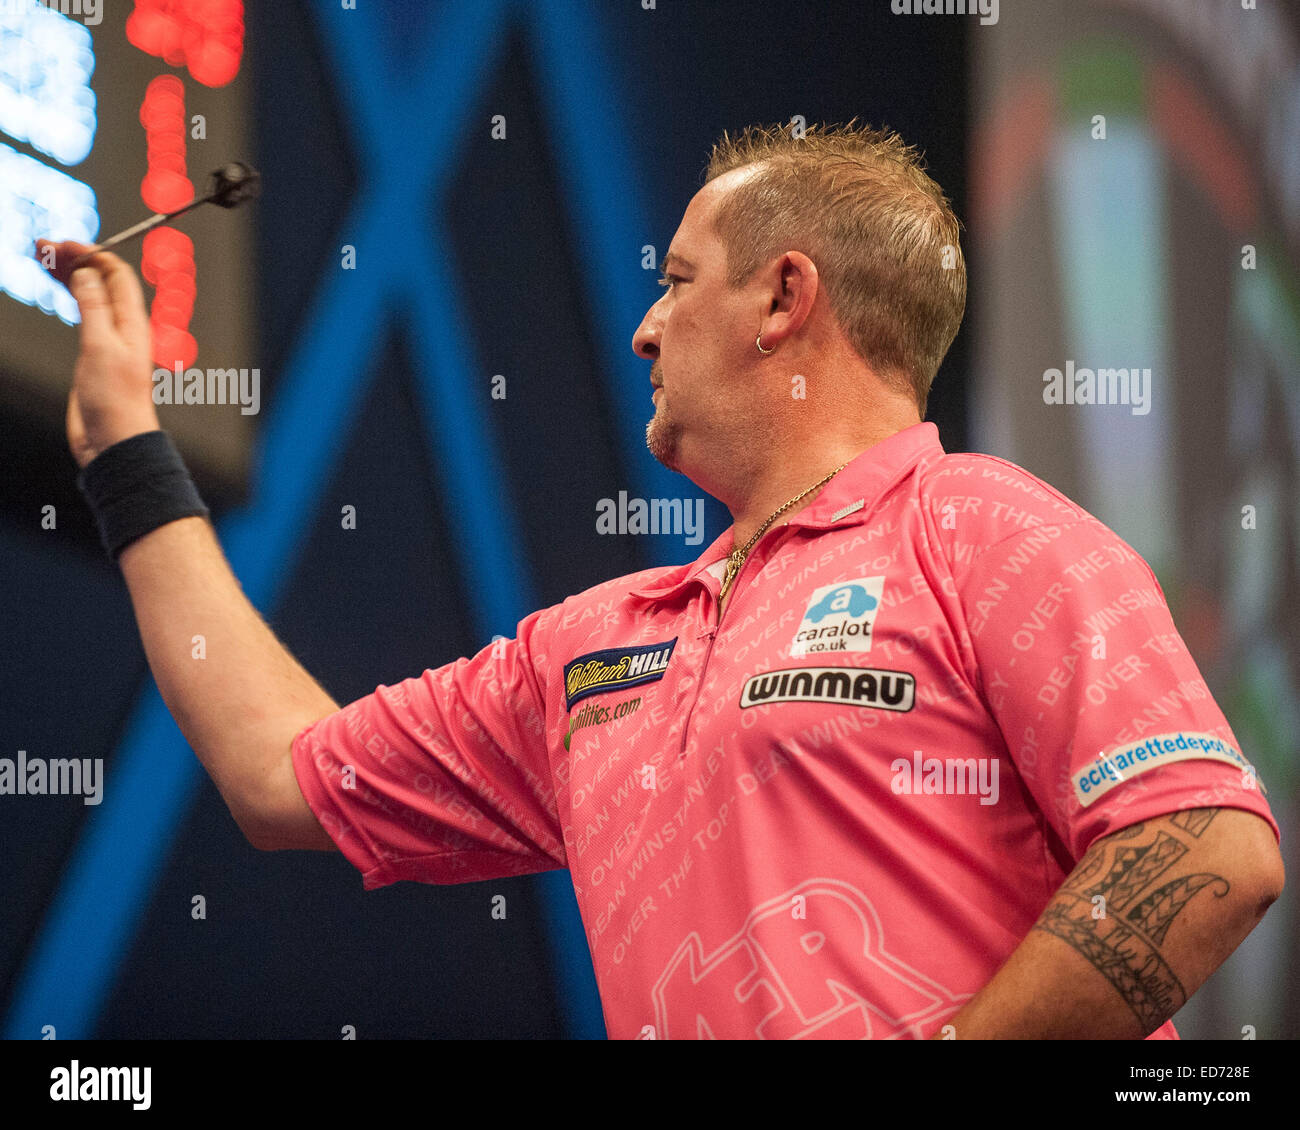 London, UK. 30th Dec, 2014. William Hill PDC World Darts Championship. Dean Winstanley (26) [ENG] in action during his game with Vincent van der Voort (23) [NED]. Vincent van der Voort won the match 4-2. © Action Plus Sports/Alamy Live News Stock Photo